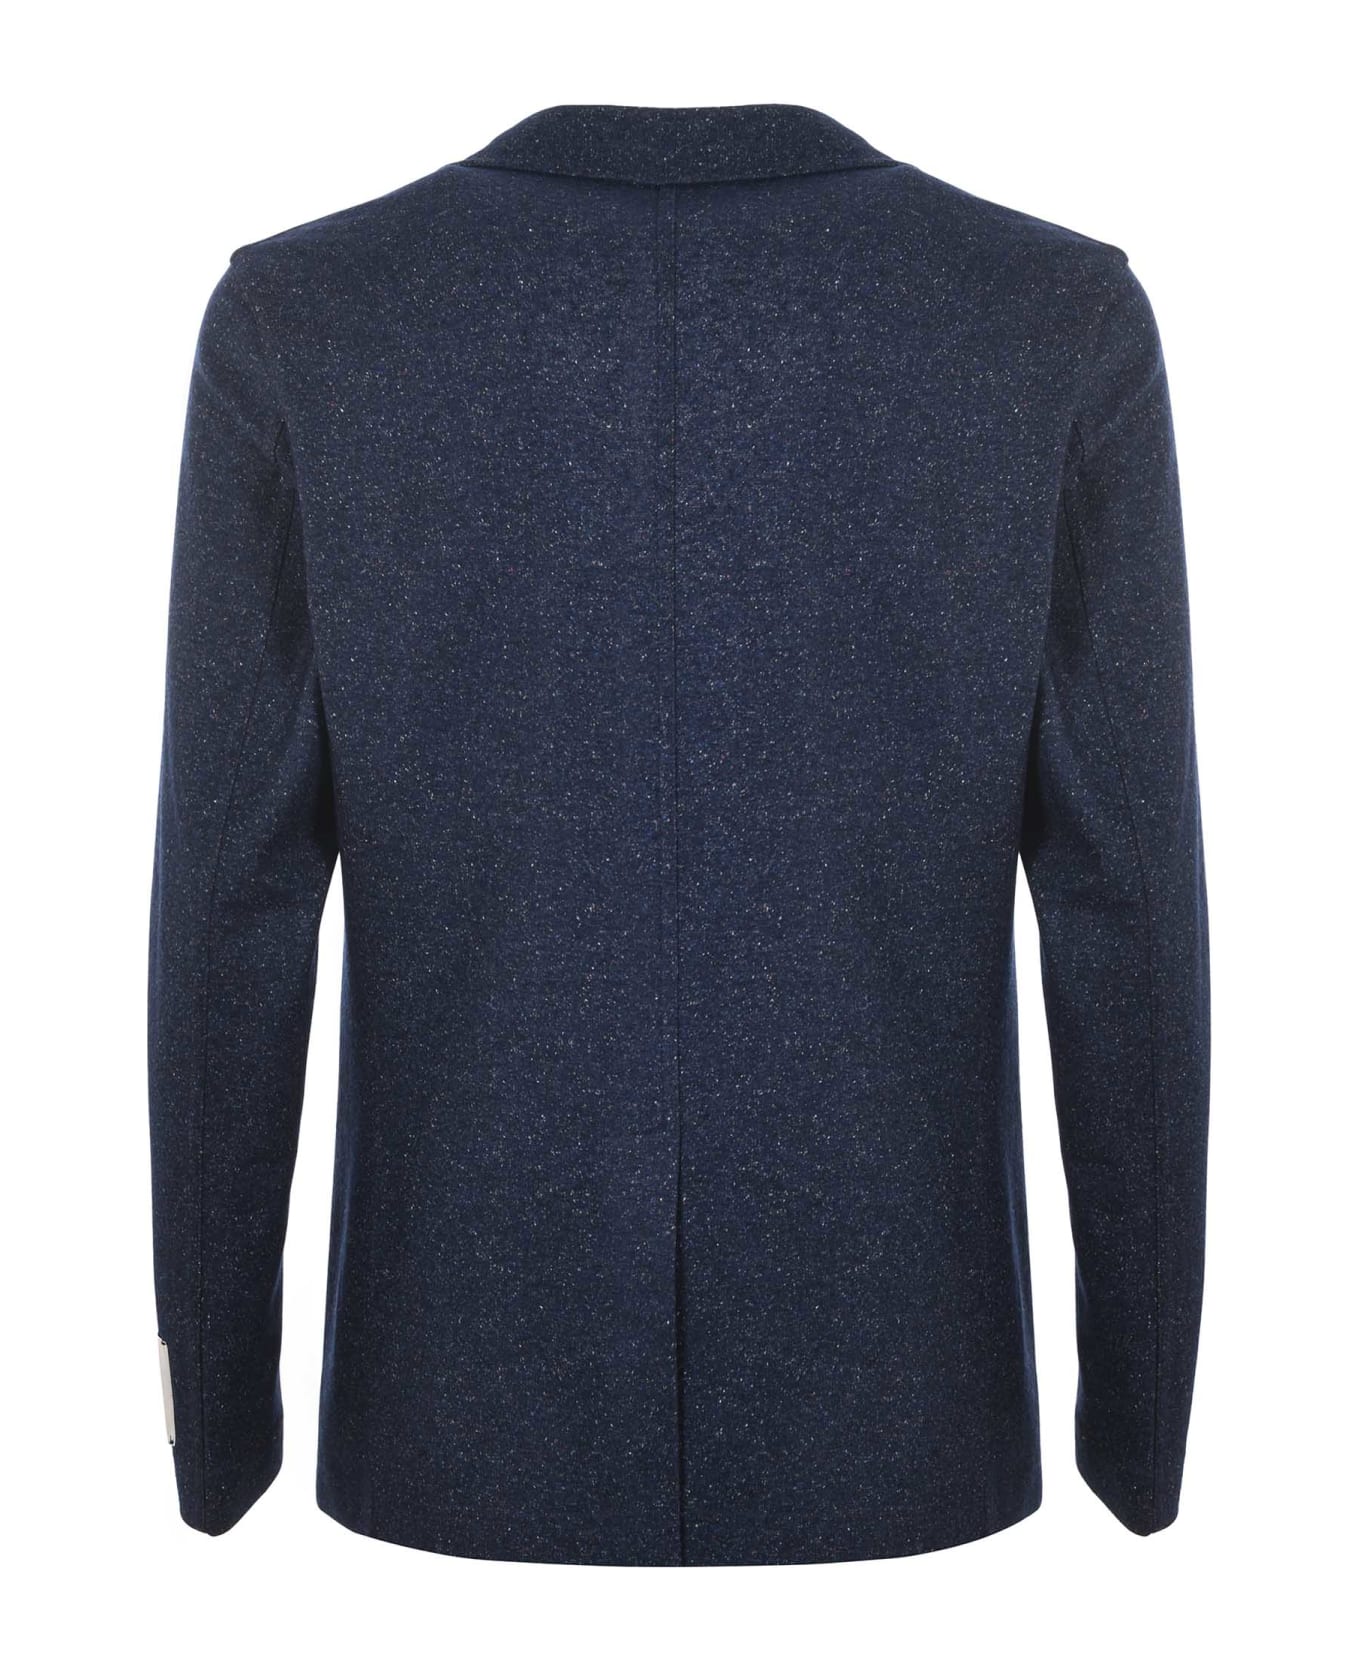 Paoloni Jacket In Knitted Wool And Silk - Blu melange